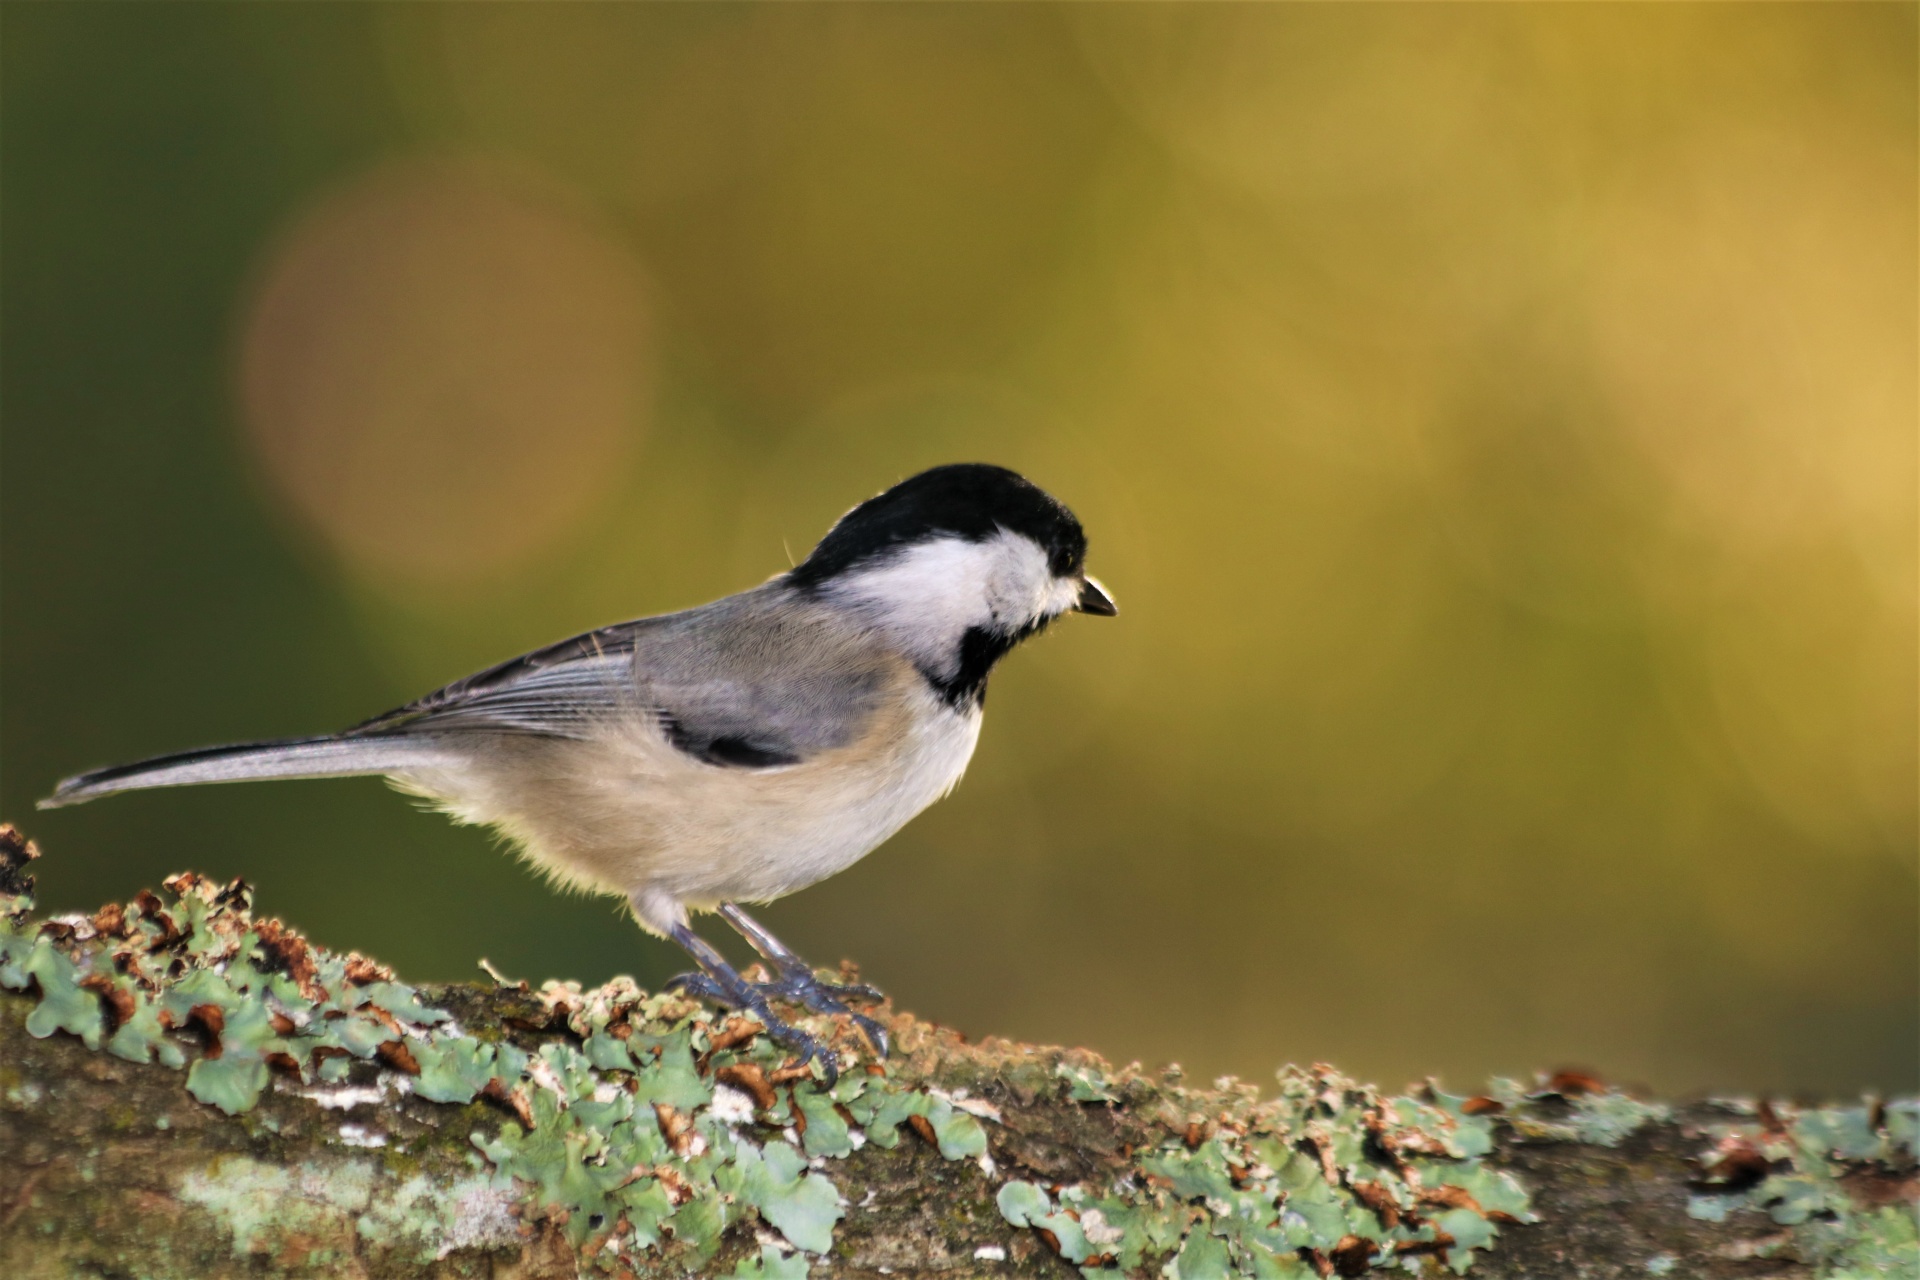 Close-up profile of a Carolina chickadee, perched on a lichen covered tree branch, with a sparkling gold and green bokeh background.